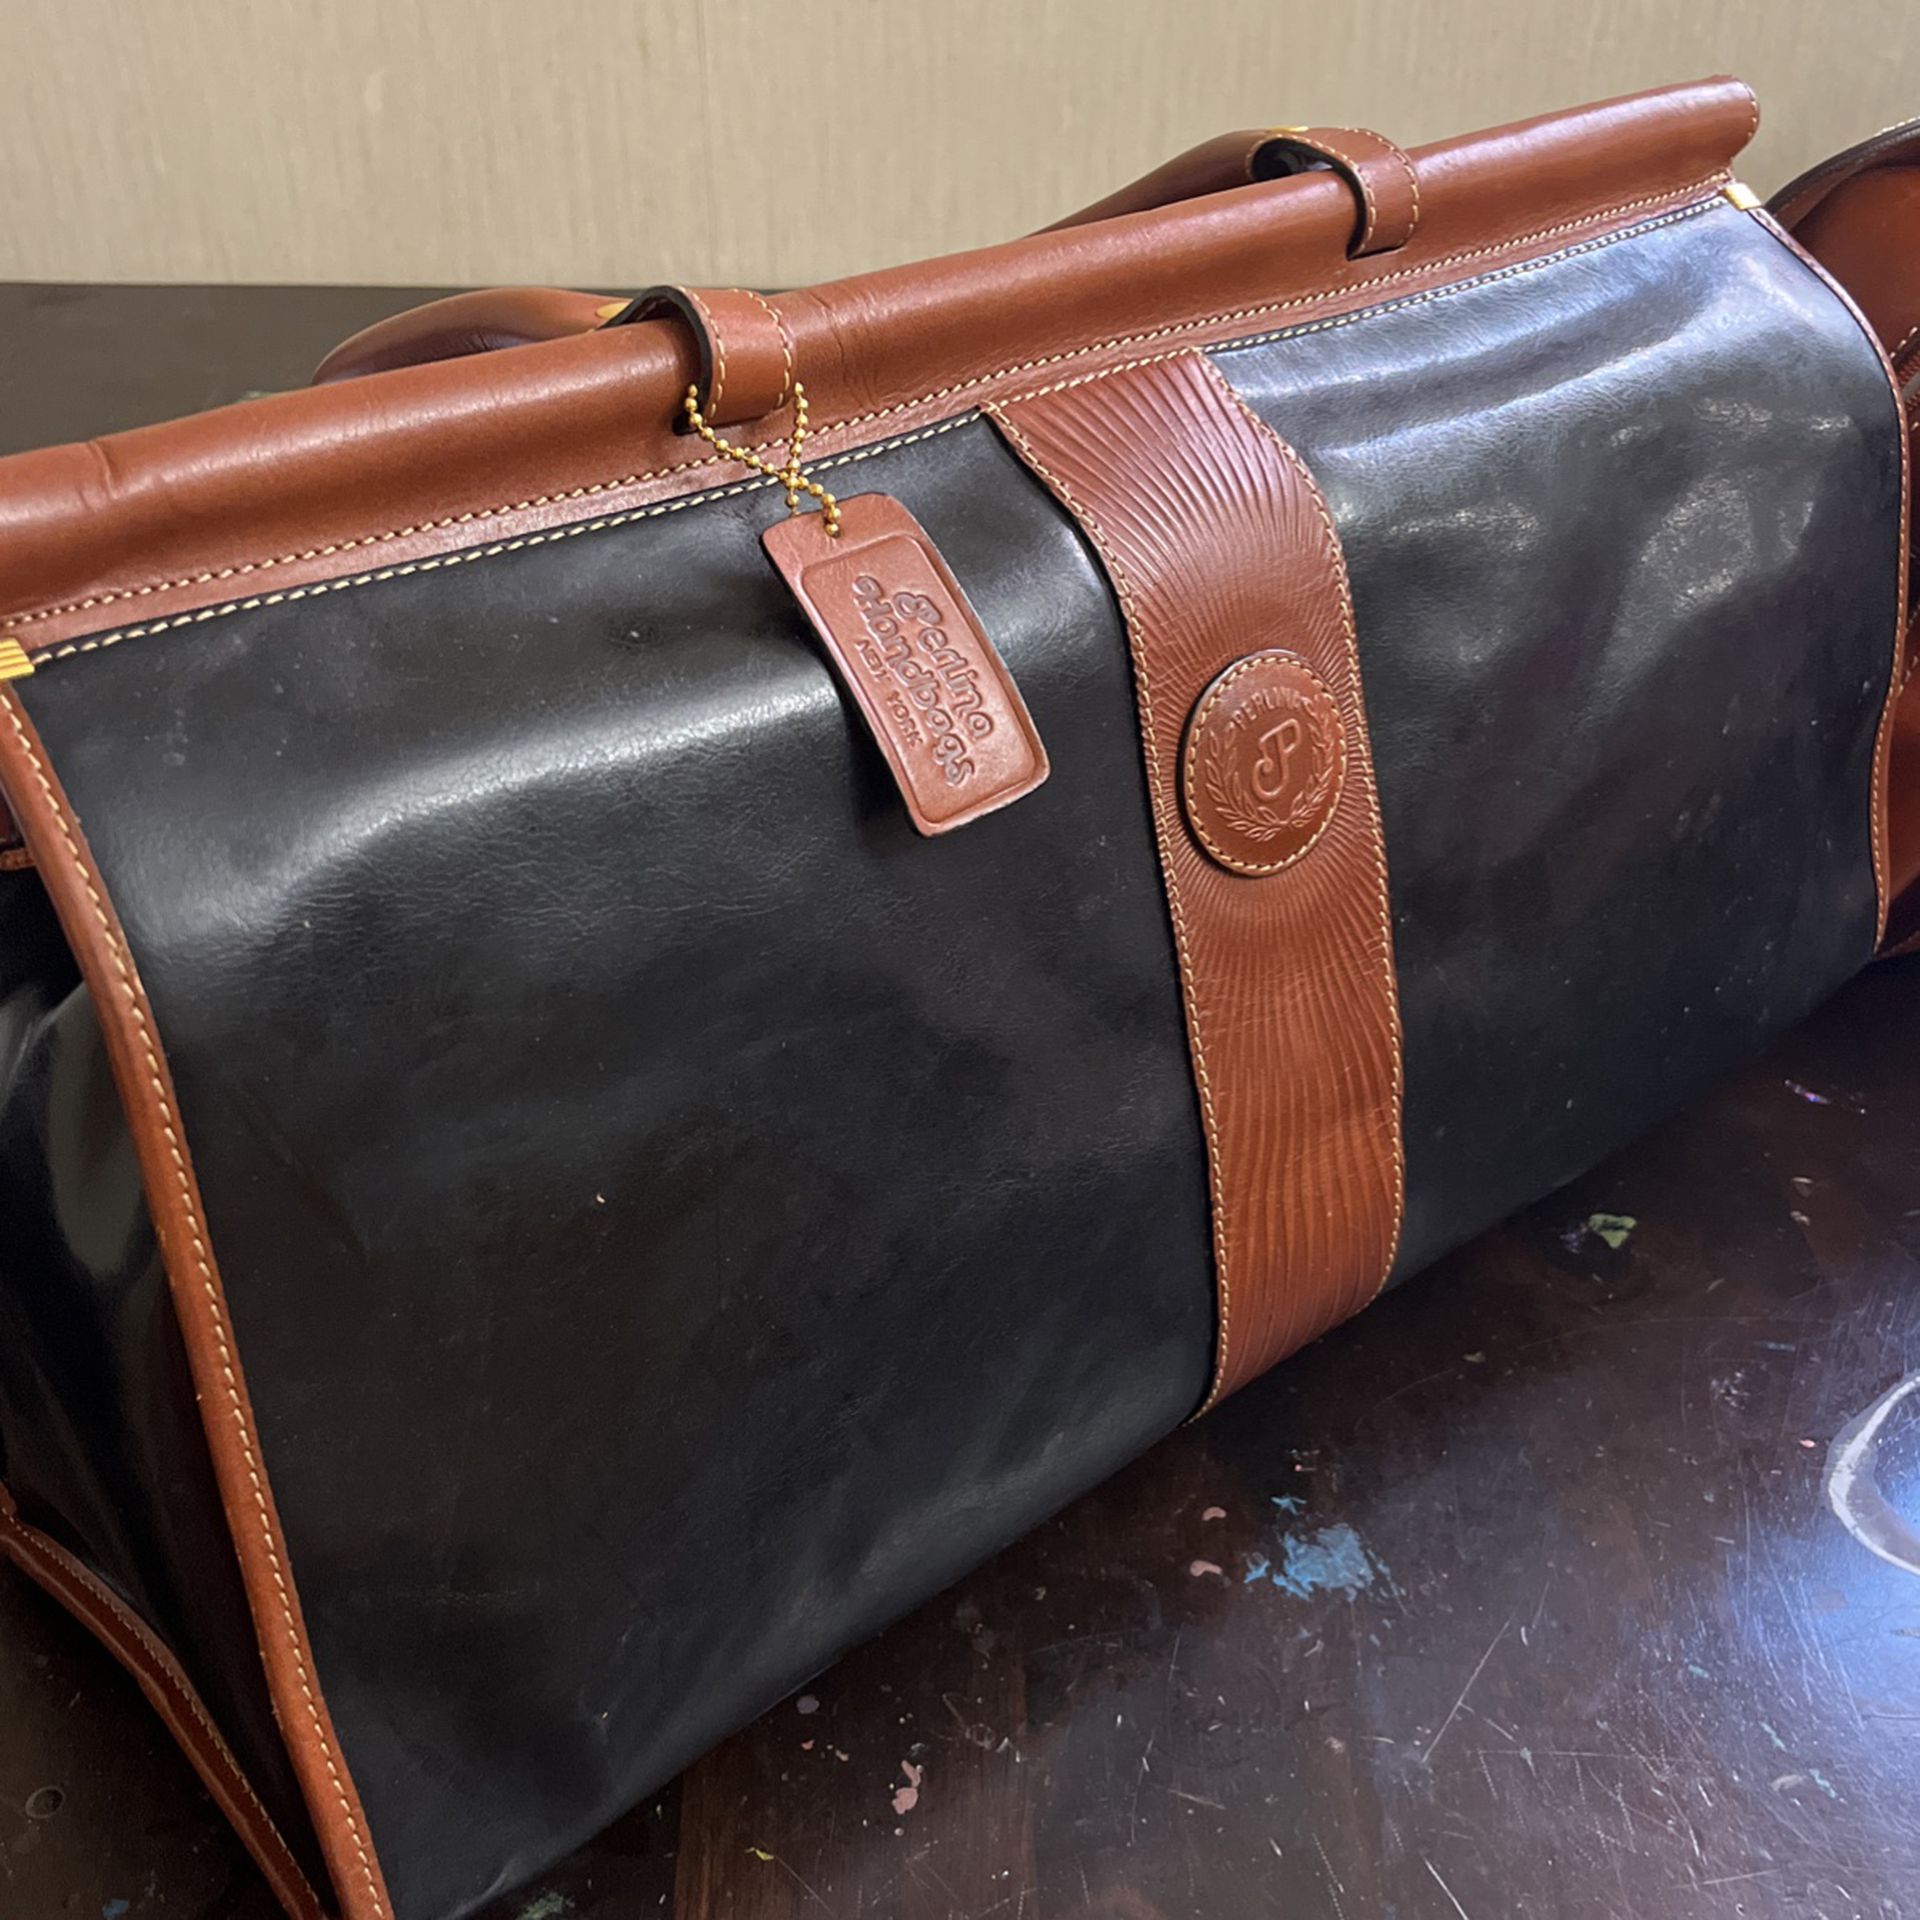 Perlina Geniune Leather Doctor Style Bag for Sale in Chicago, IL - OfferUp